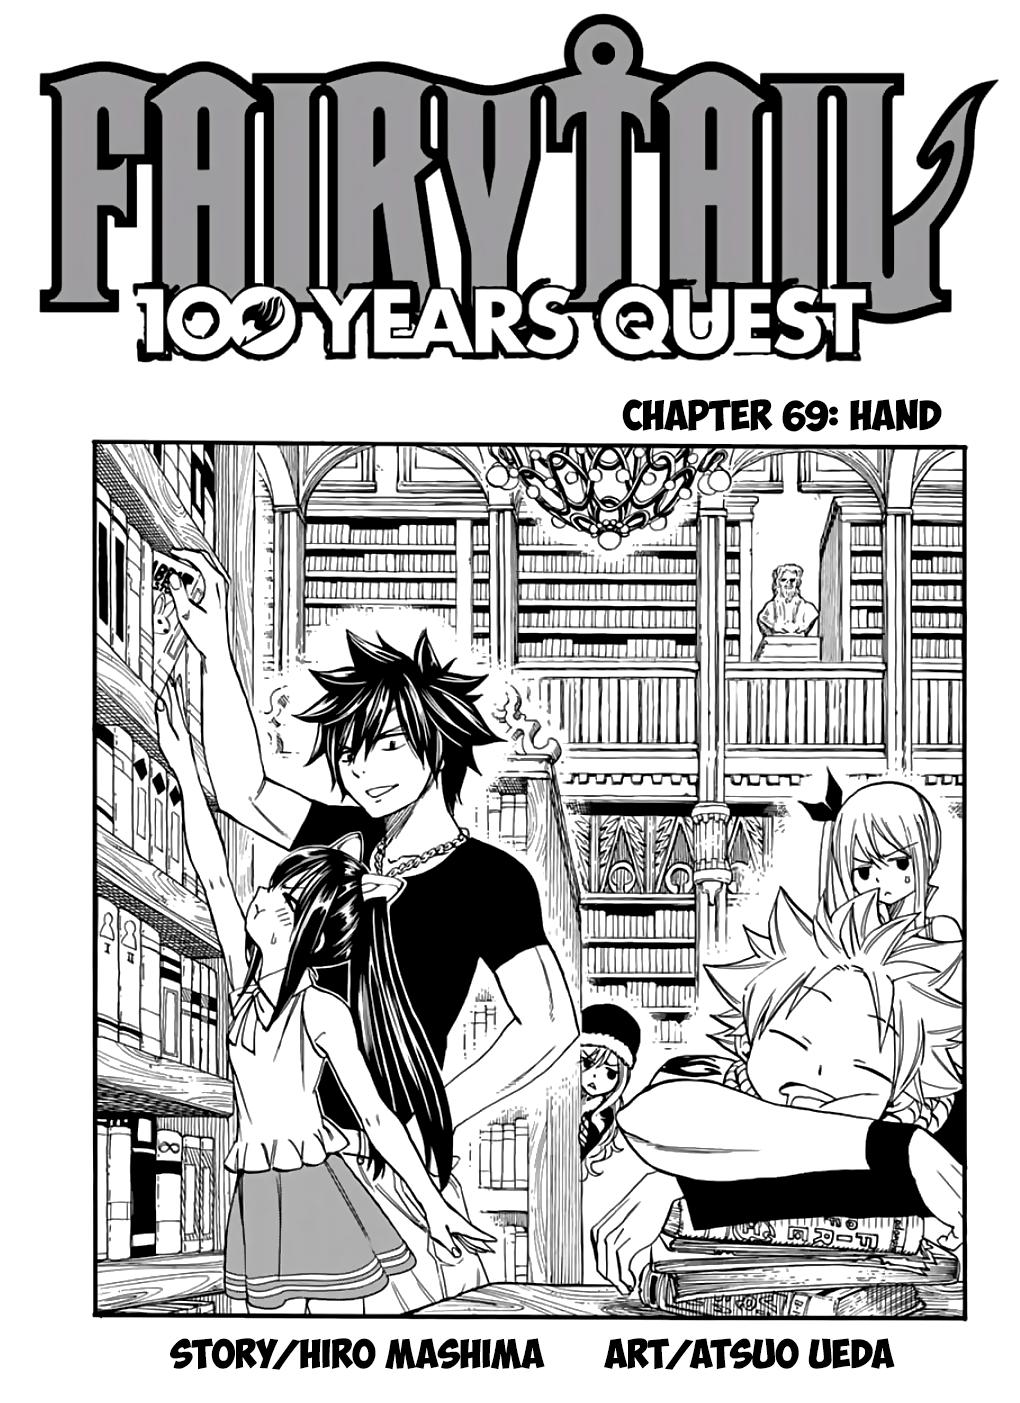 Fairy tail 100 year quest read